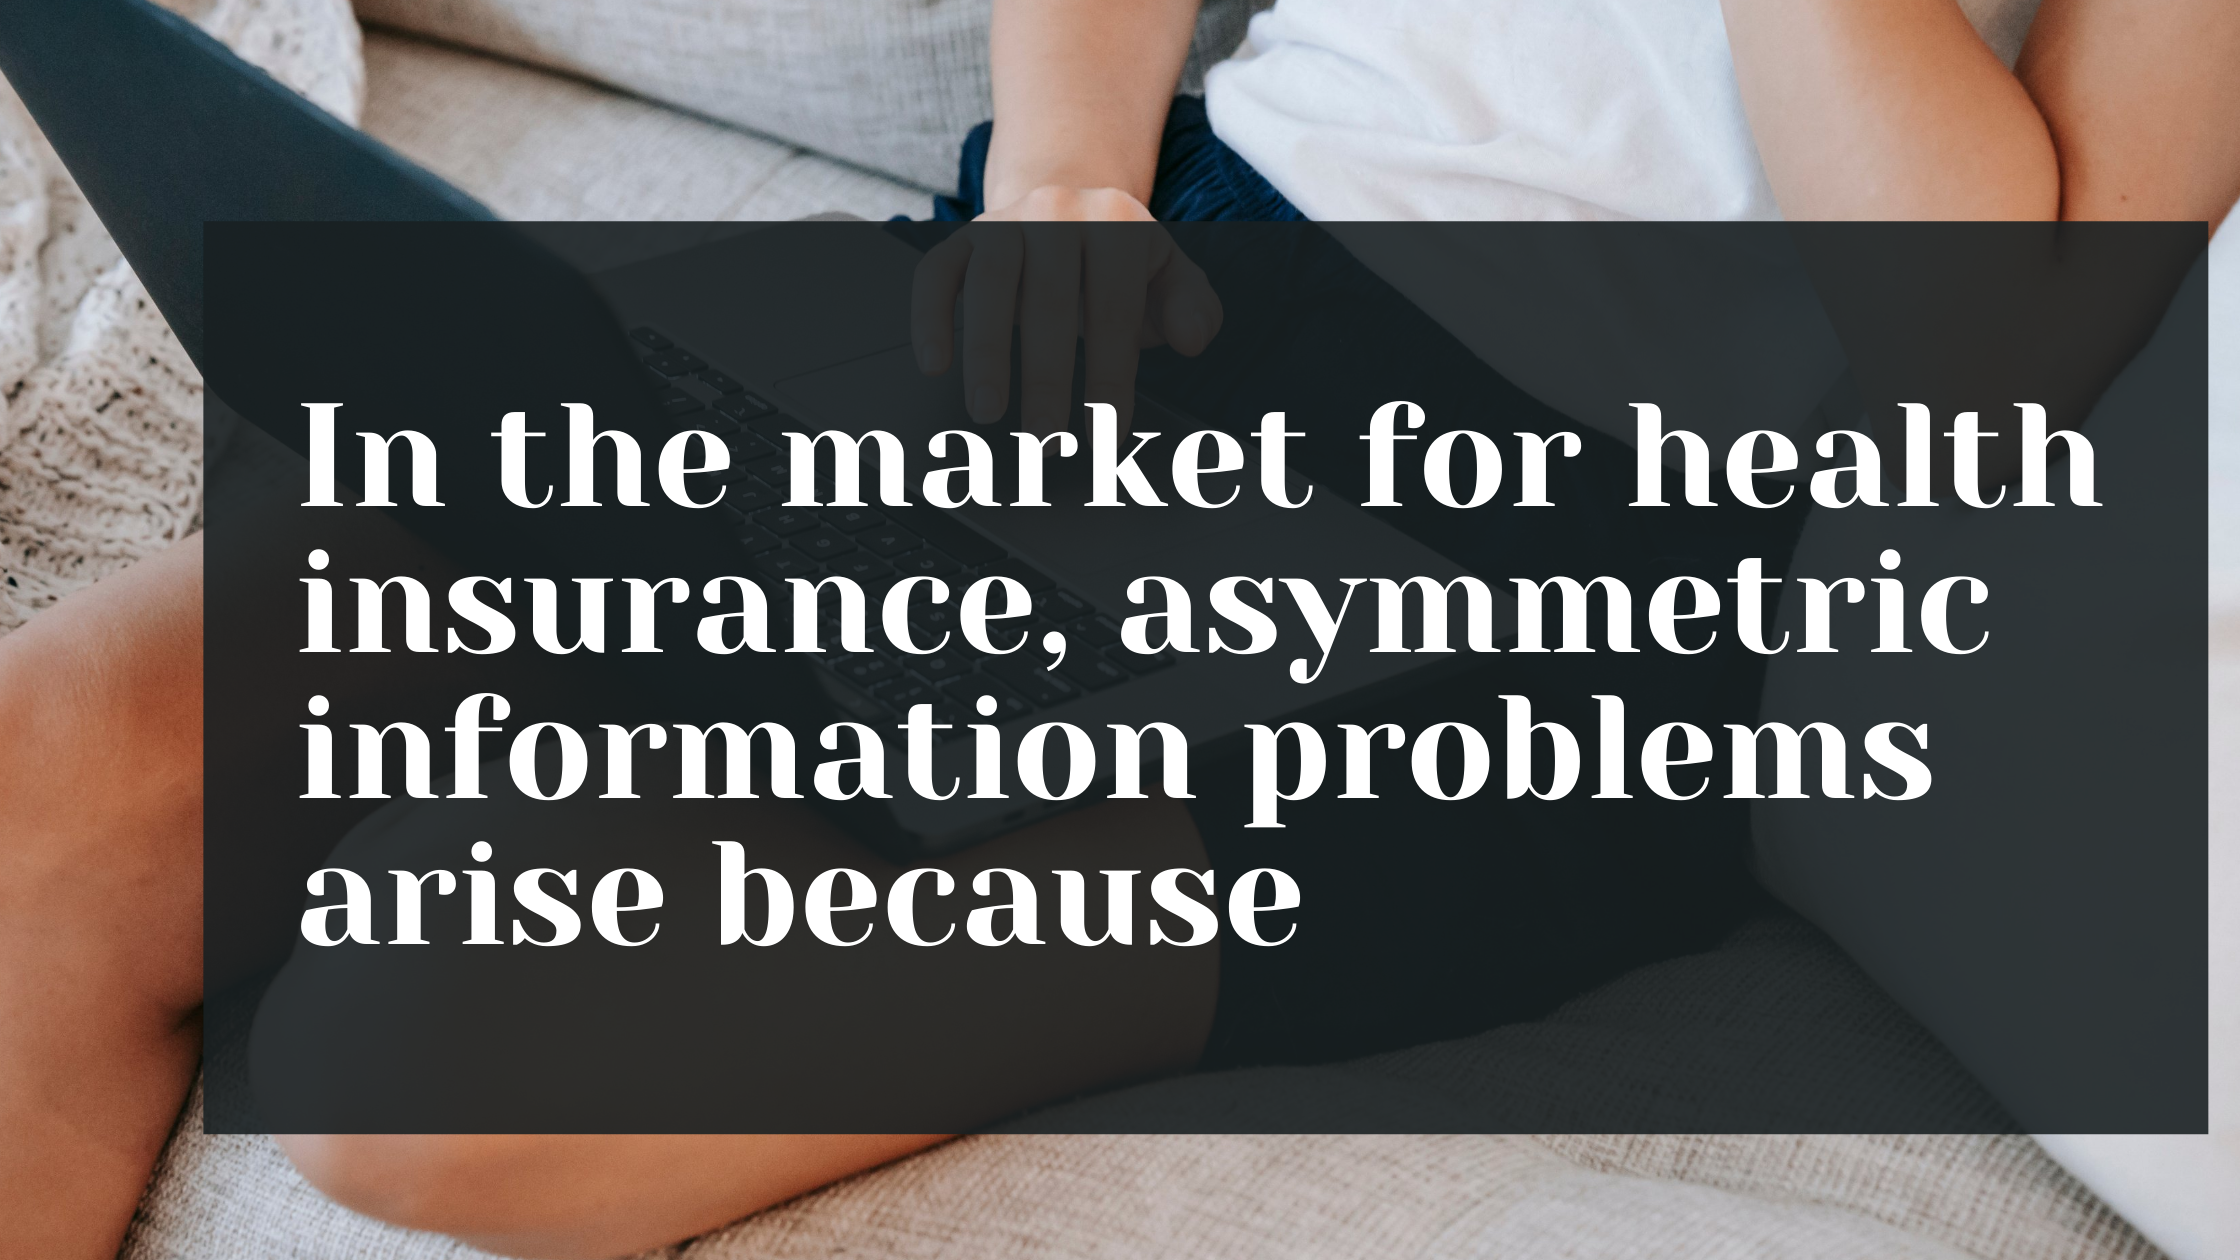 In the market for health insurance, asymmetric information problems arise because